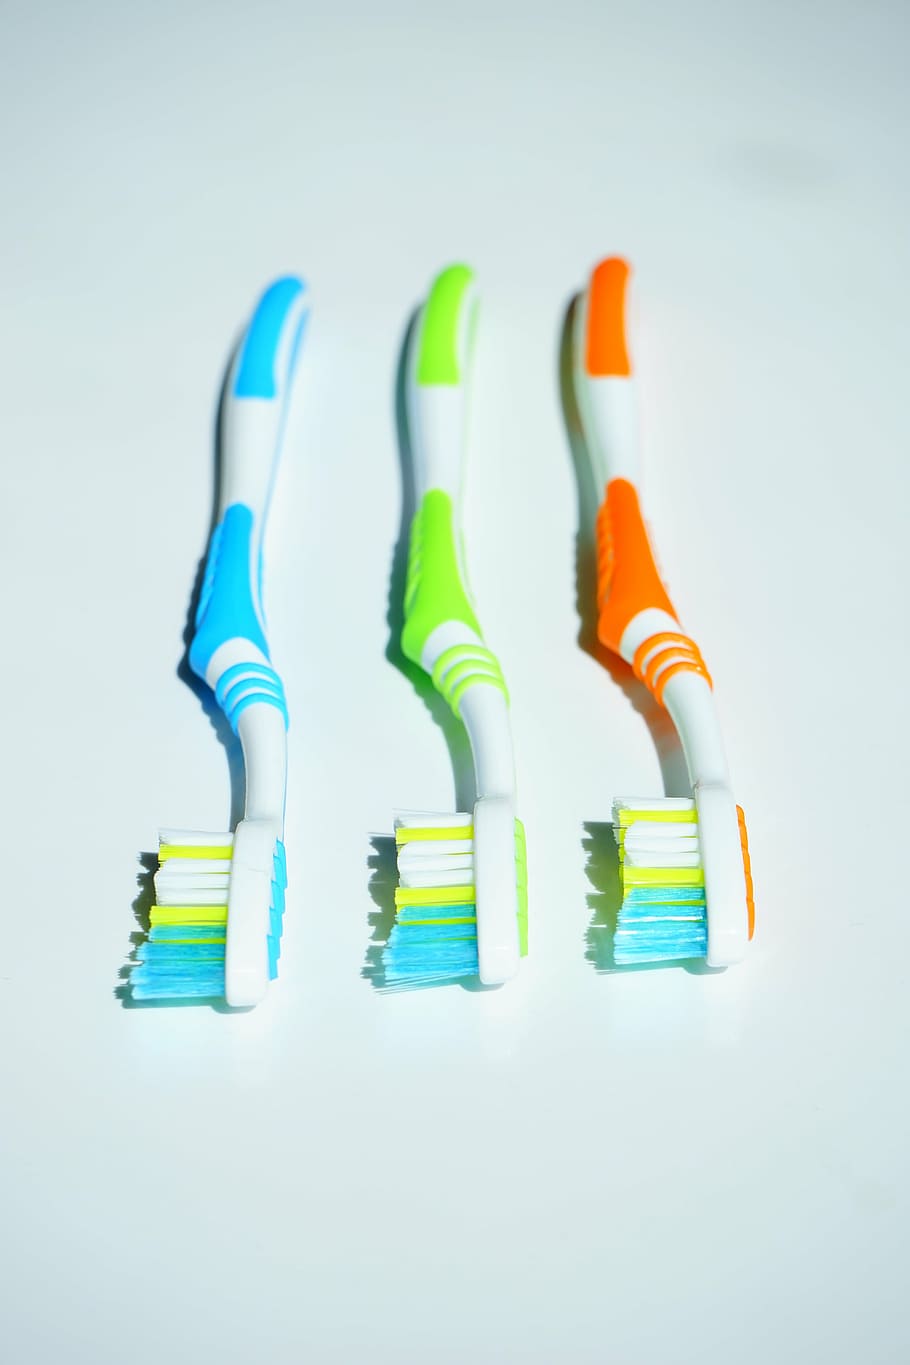 tooth brushes, hygiene, clean, dental care, dental hygiene, toothbrush head, bless you, brush head, care, body care